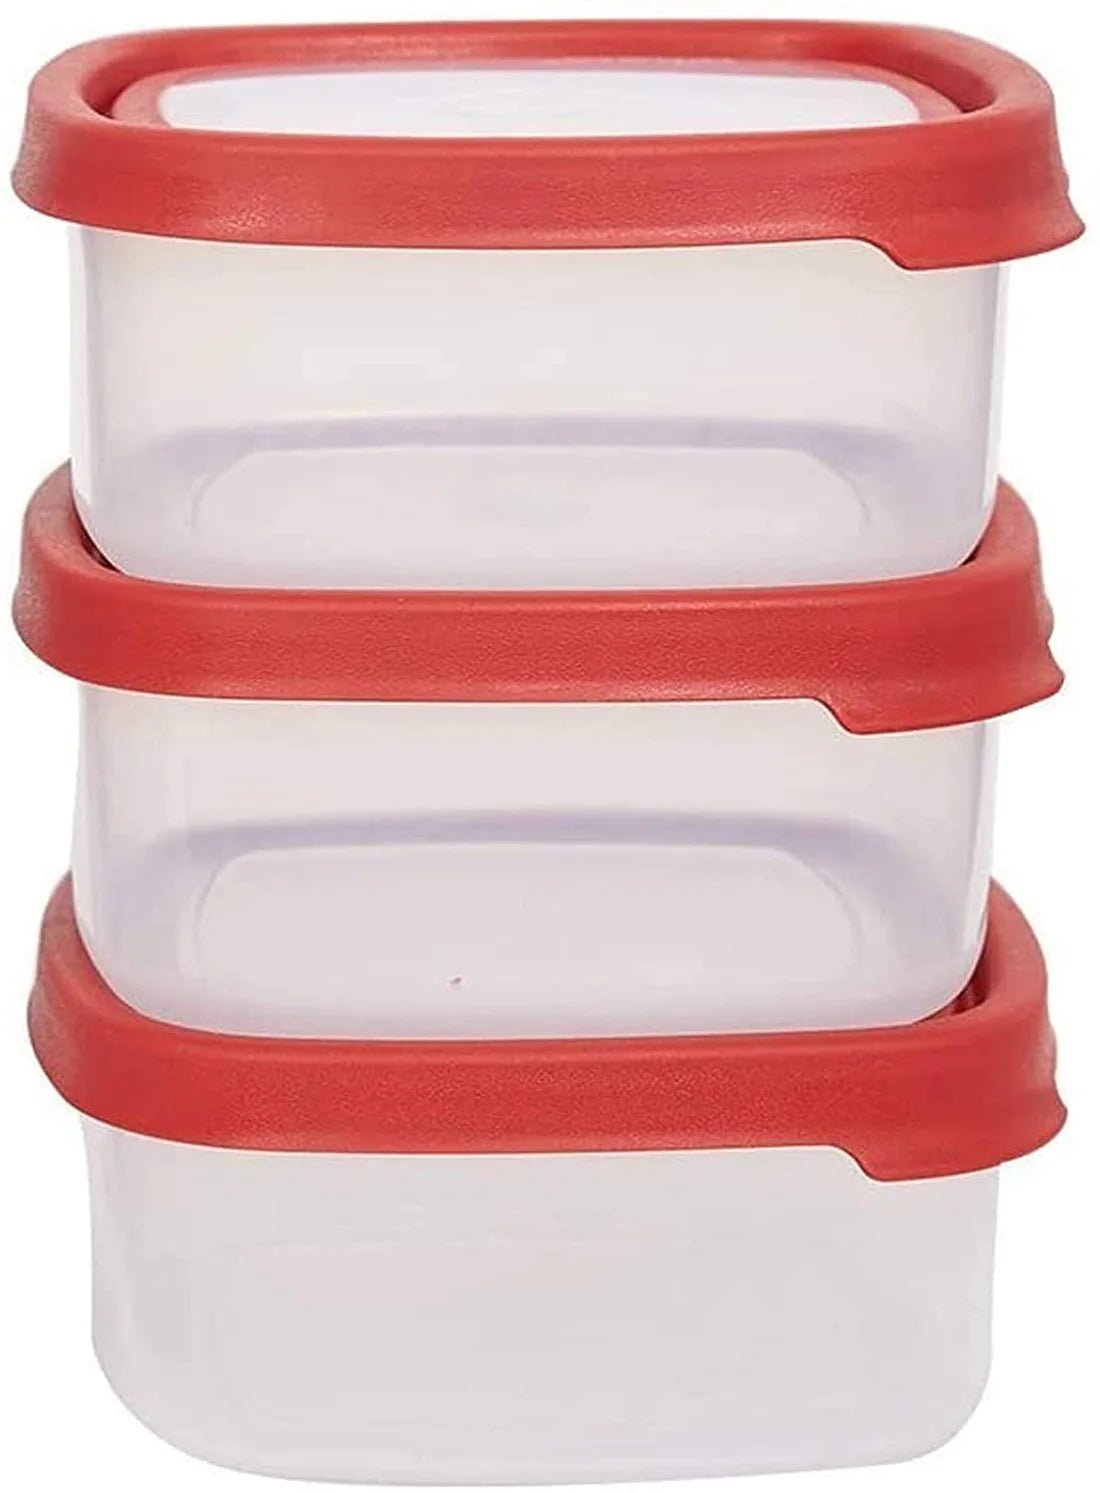 6 PCS Food Storage Containers With Lids Durable Plastic Containers Set,Set of 3 (3.2 Cup)